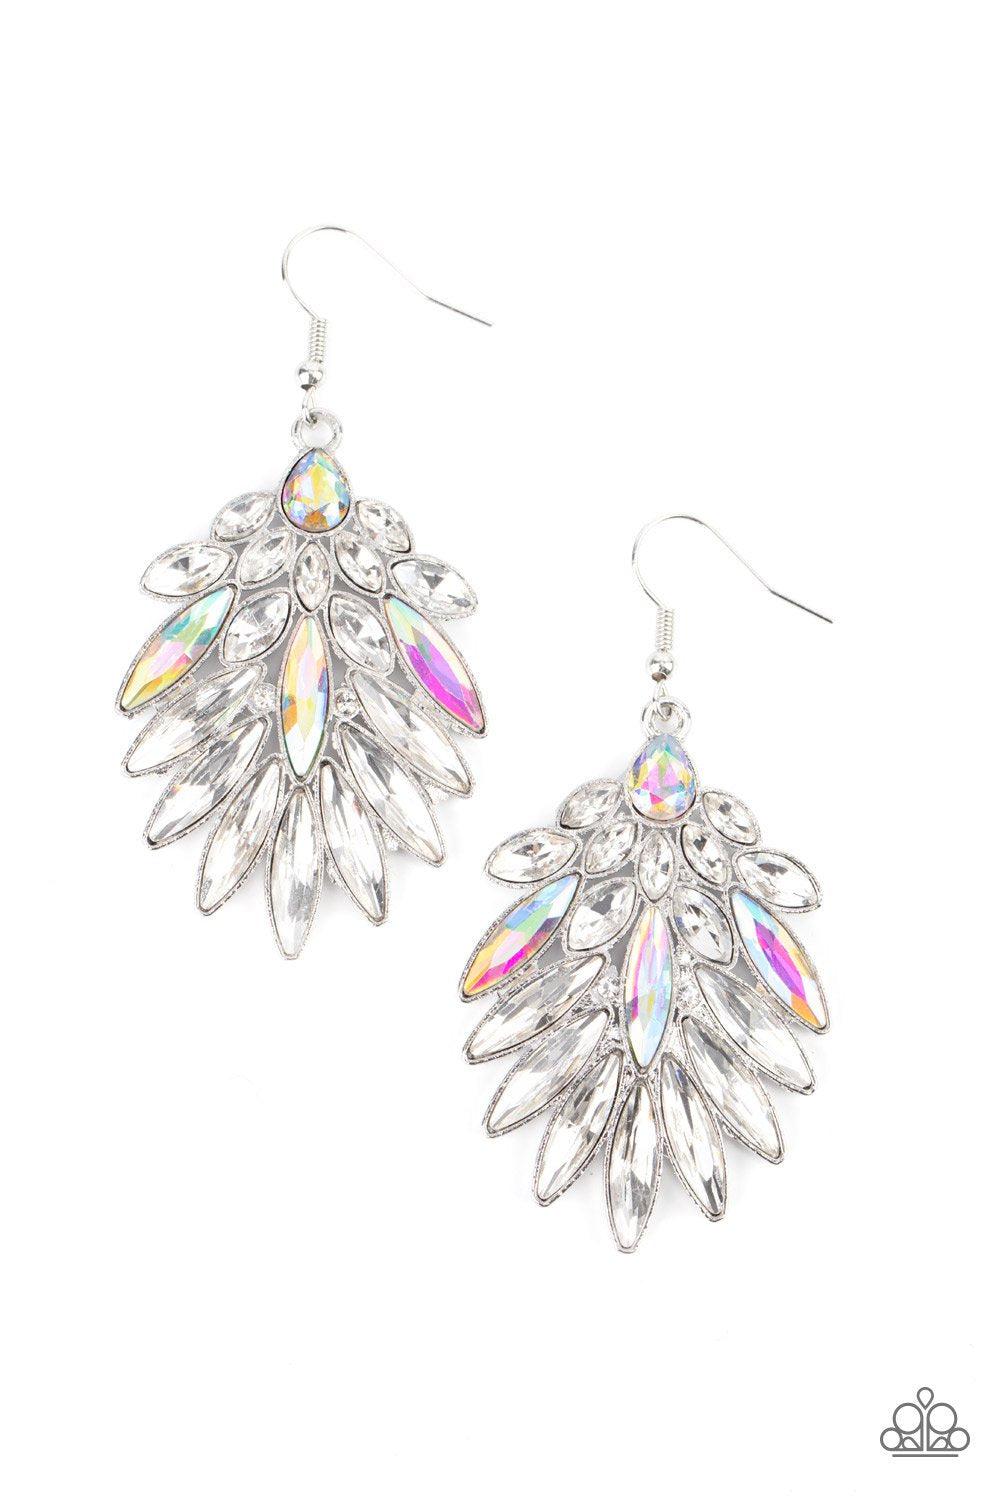 COSMIC-politan Multi Iridescent Rhinestone Earrings - Paparazzi Accessories 2021 Convention Exclusive- lightbox - CarasShop.com - $5 Jewelry by Cara Jewels